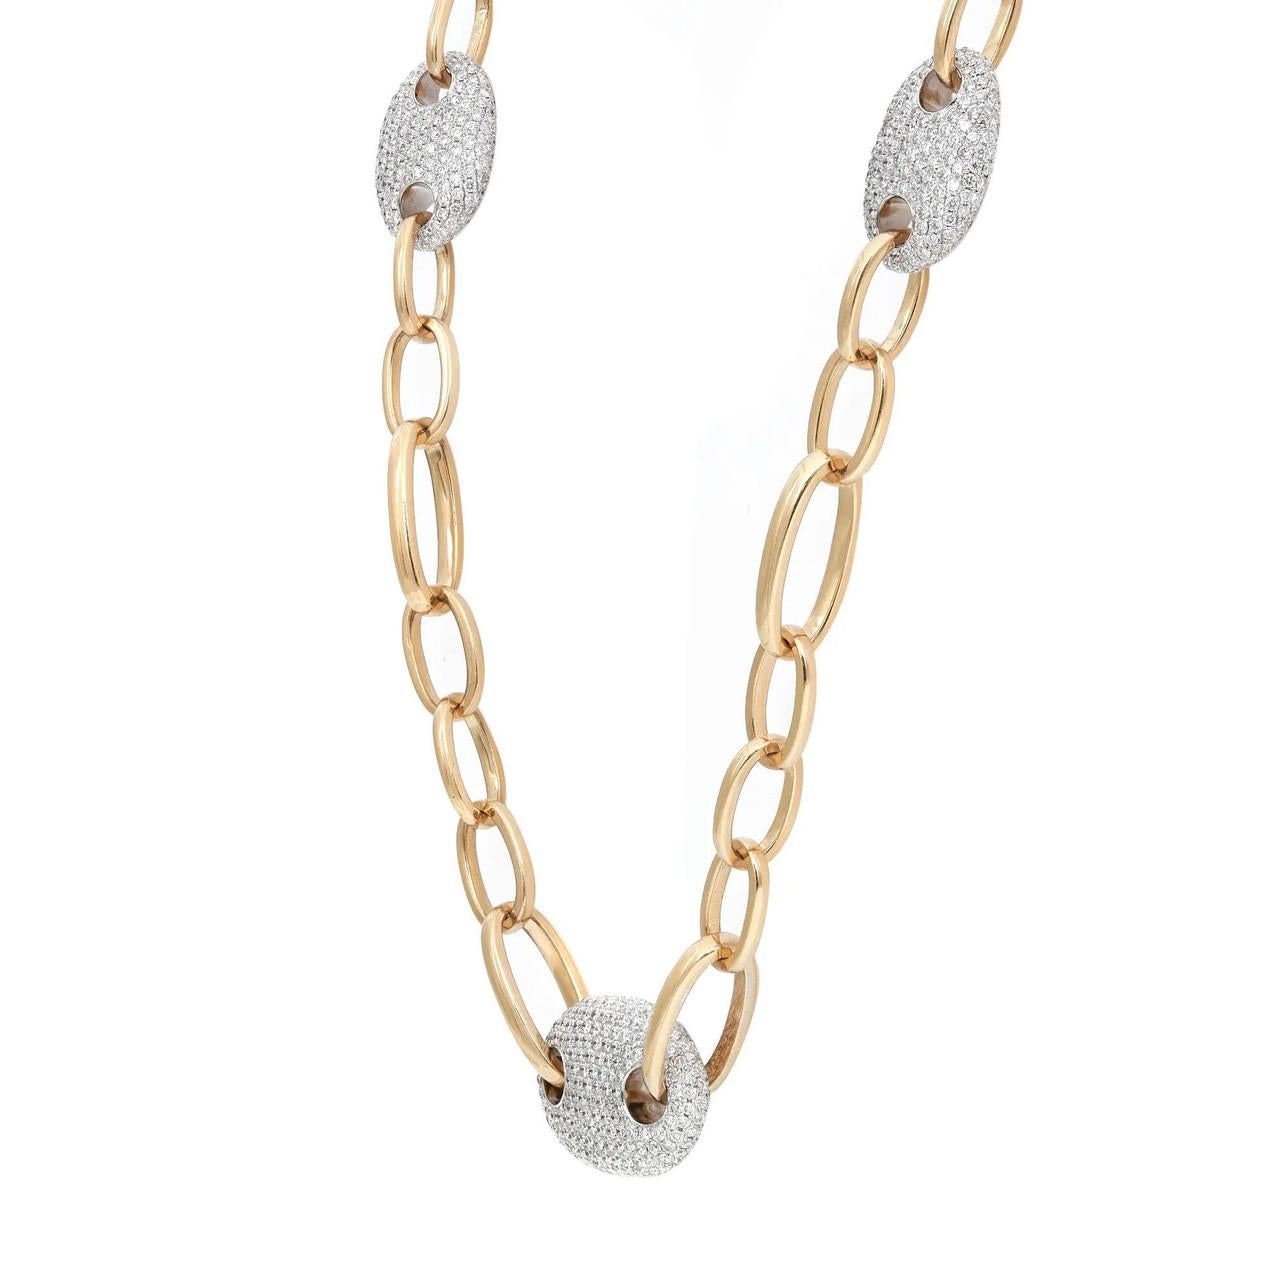 Step into a world of glamour with our 13.47 Carat Diamond Mariner Link Chain Necklace in stunning 18K Yellow Gold. This show-stopping piece is a dazzling symphony of luxury, featuring meticulously crafted mariner links adorned with a breathtaking